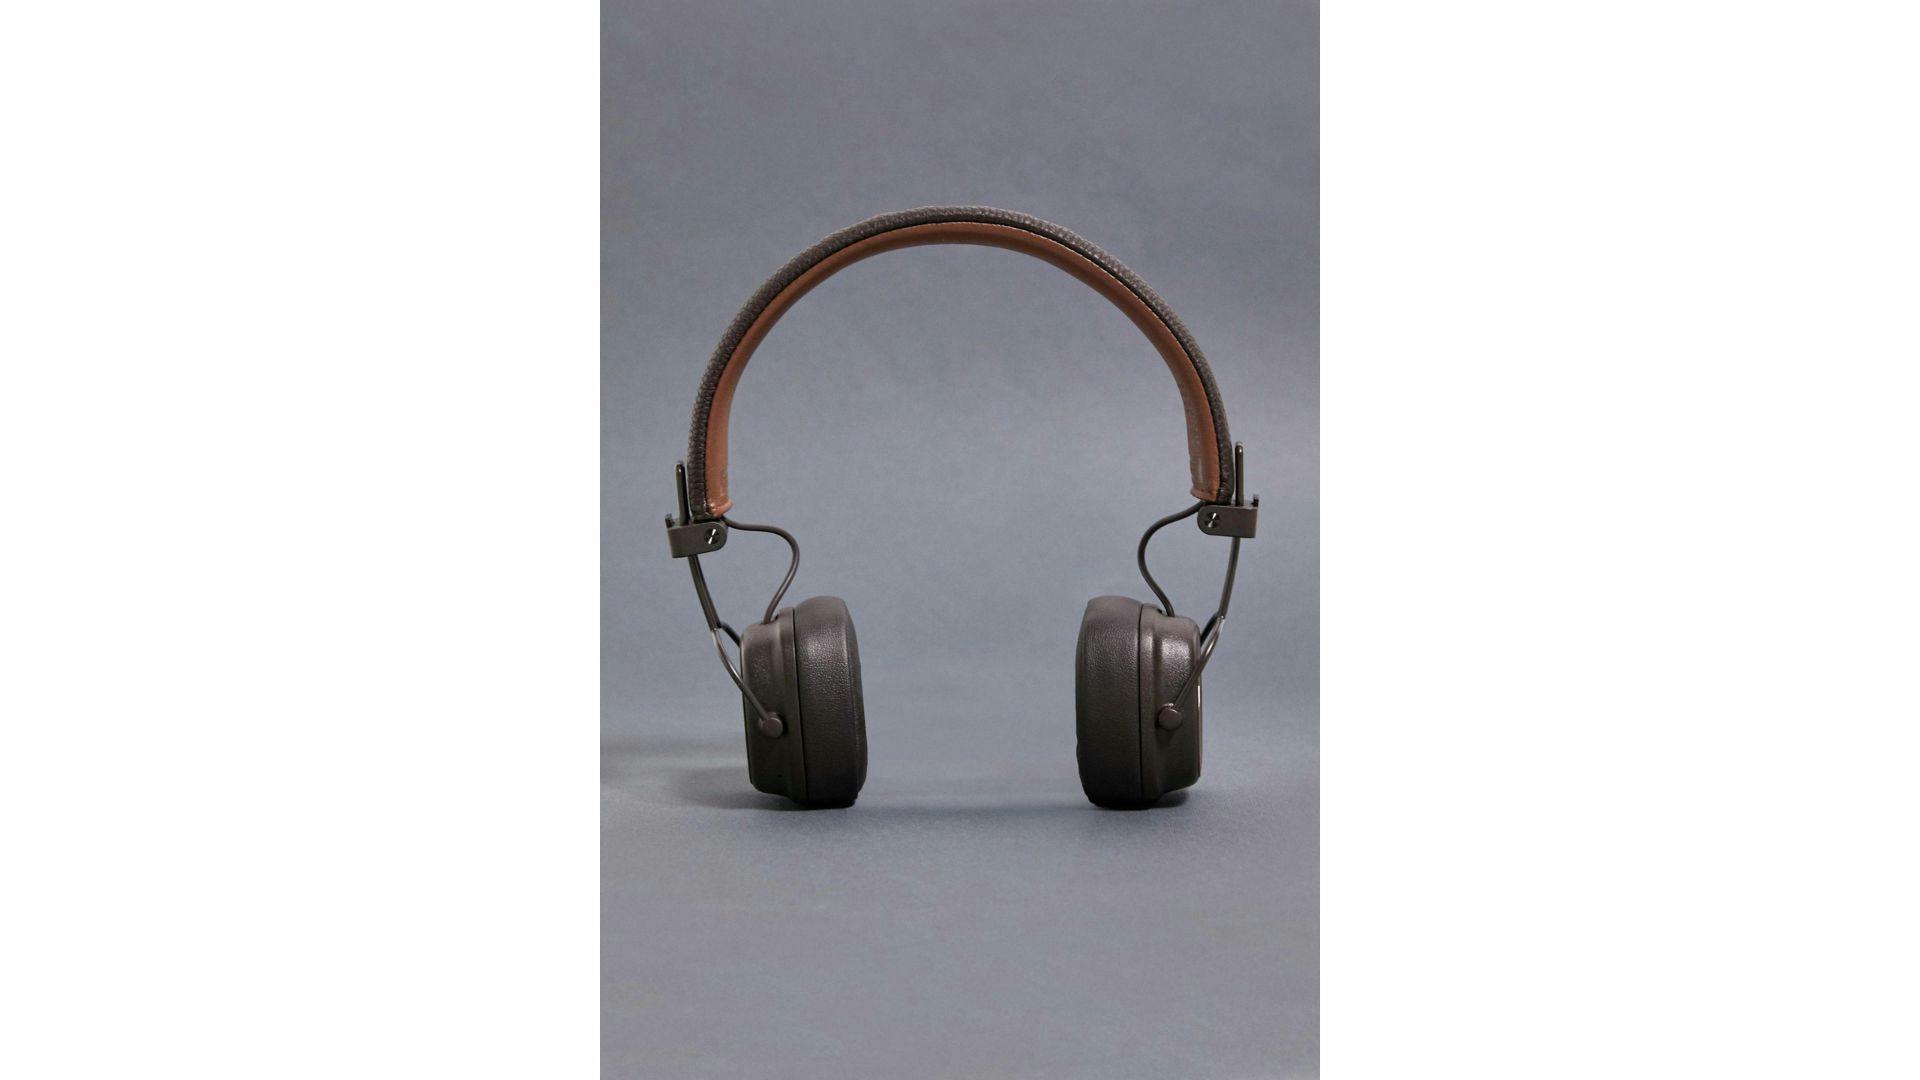 One of the best seller of Urban Outfitters is the Marshal Brown Major IV Headphones